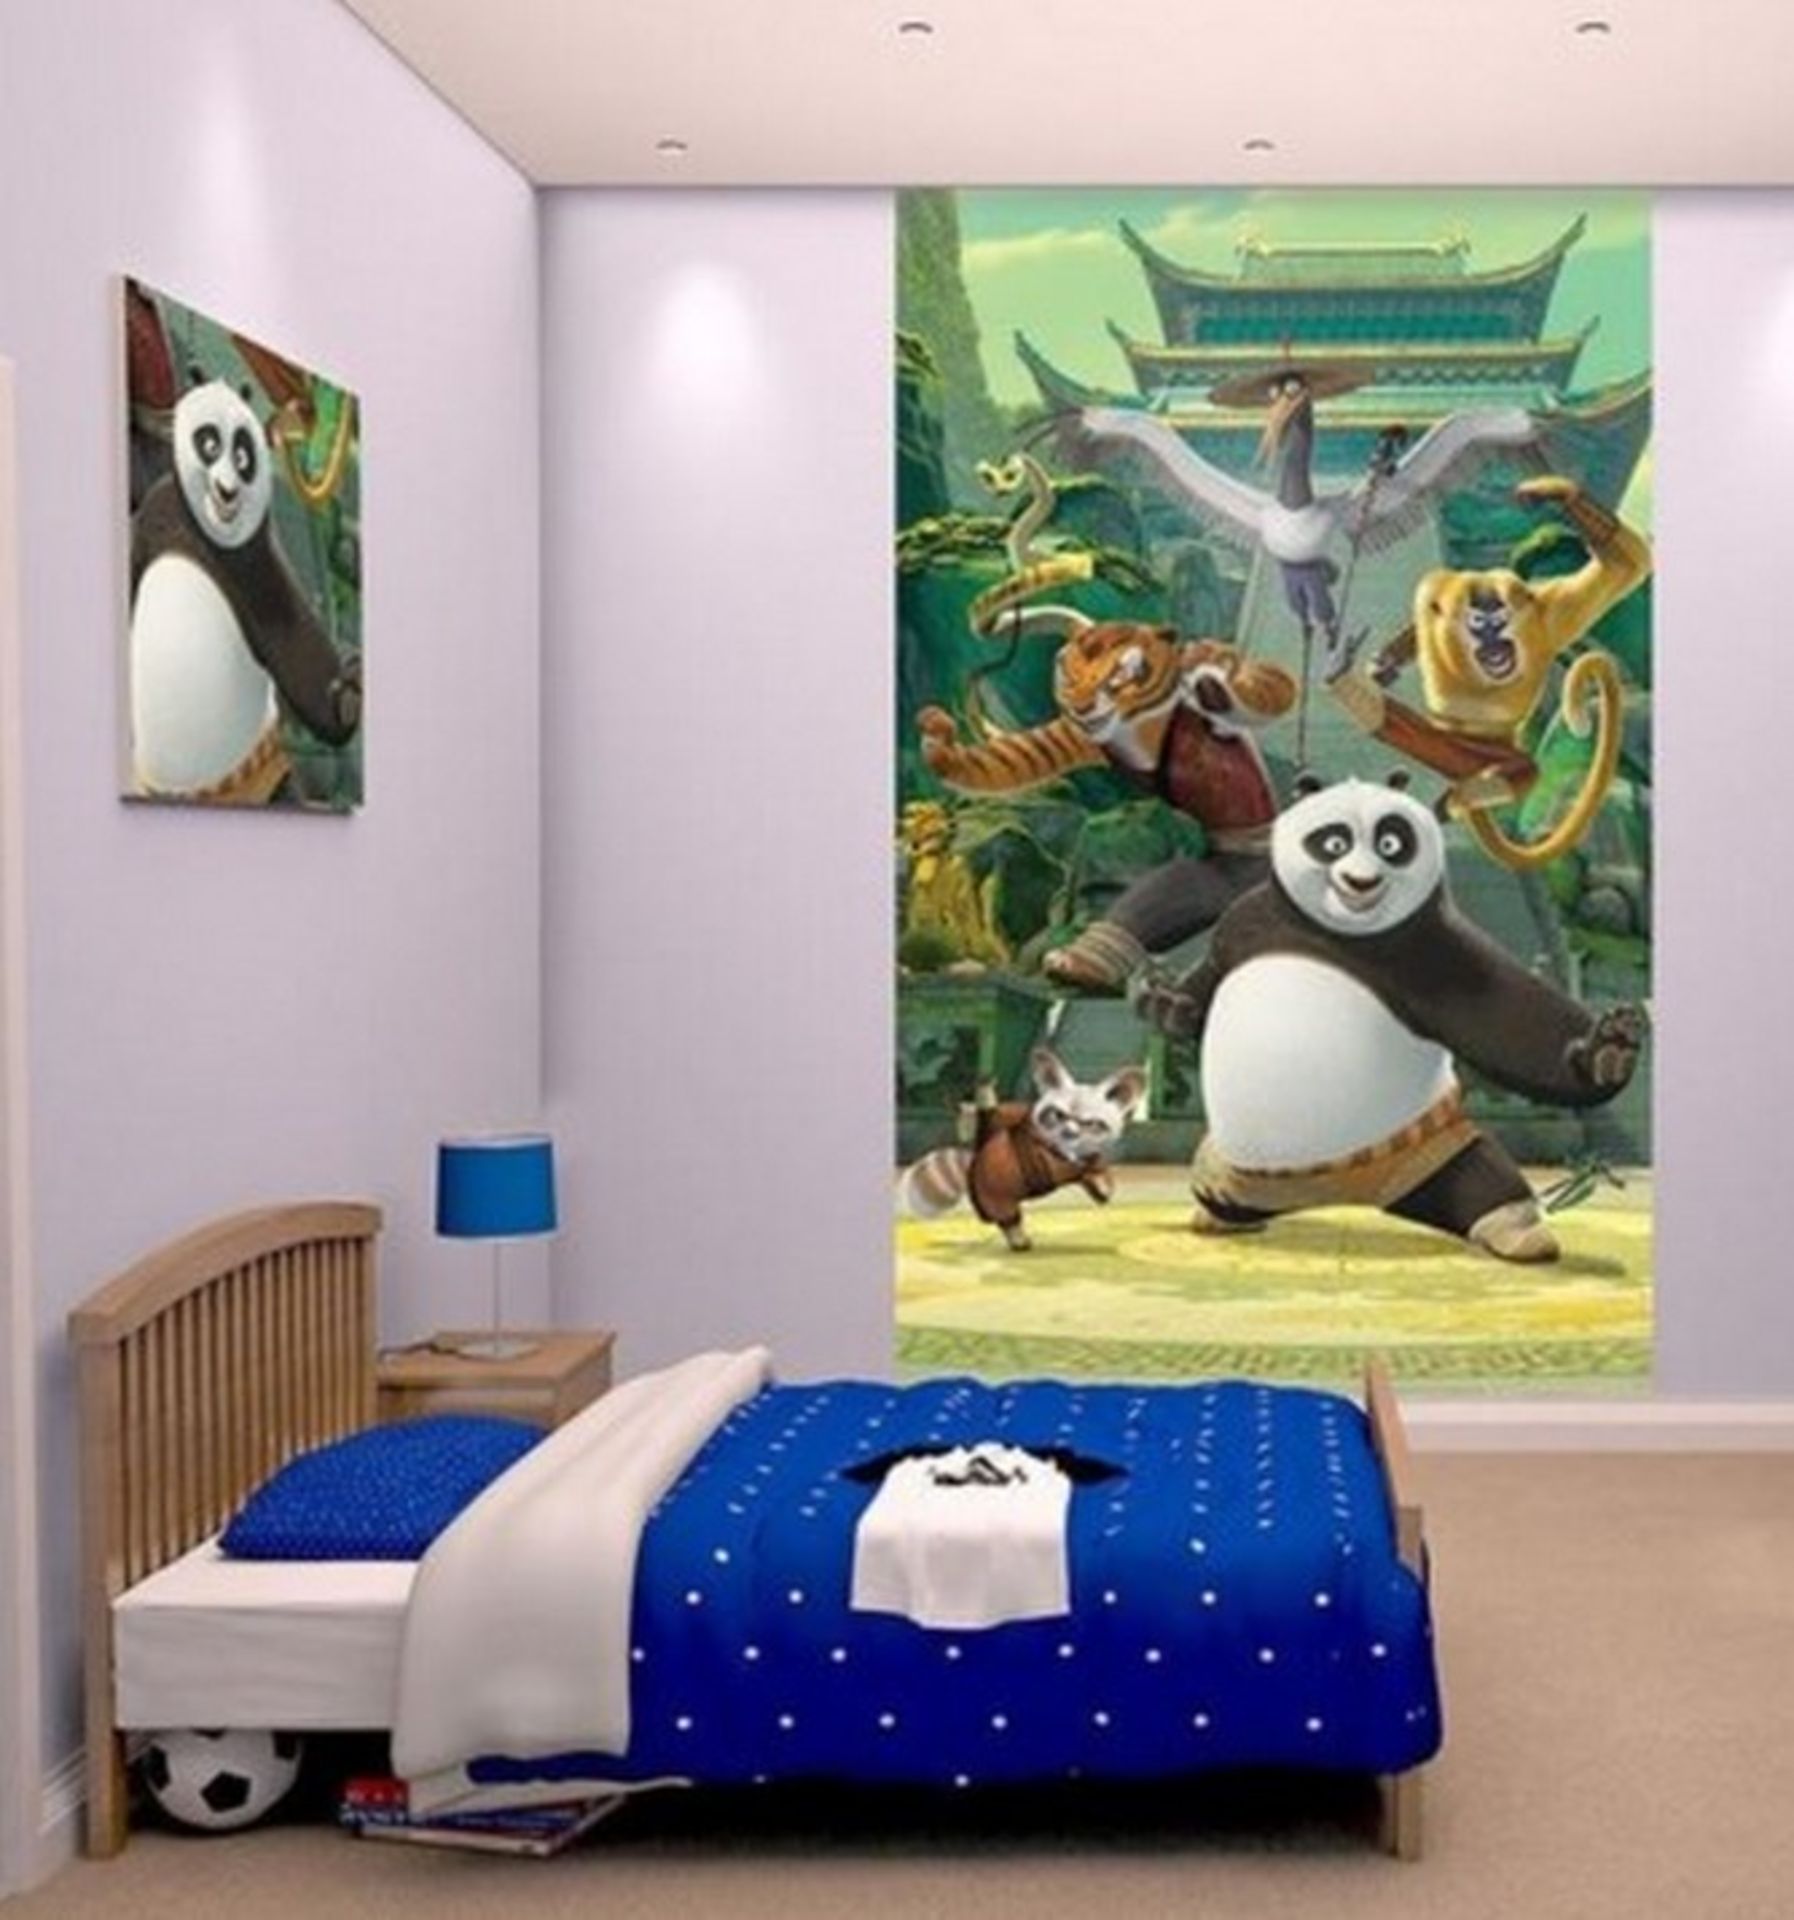 8 Mixed Large Wall Murals You Will Get A Mix Of 3 Different Designs - Image 2 of 3